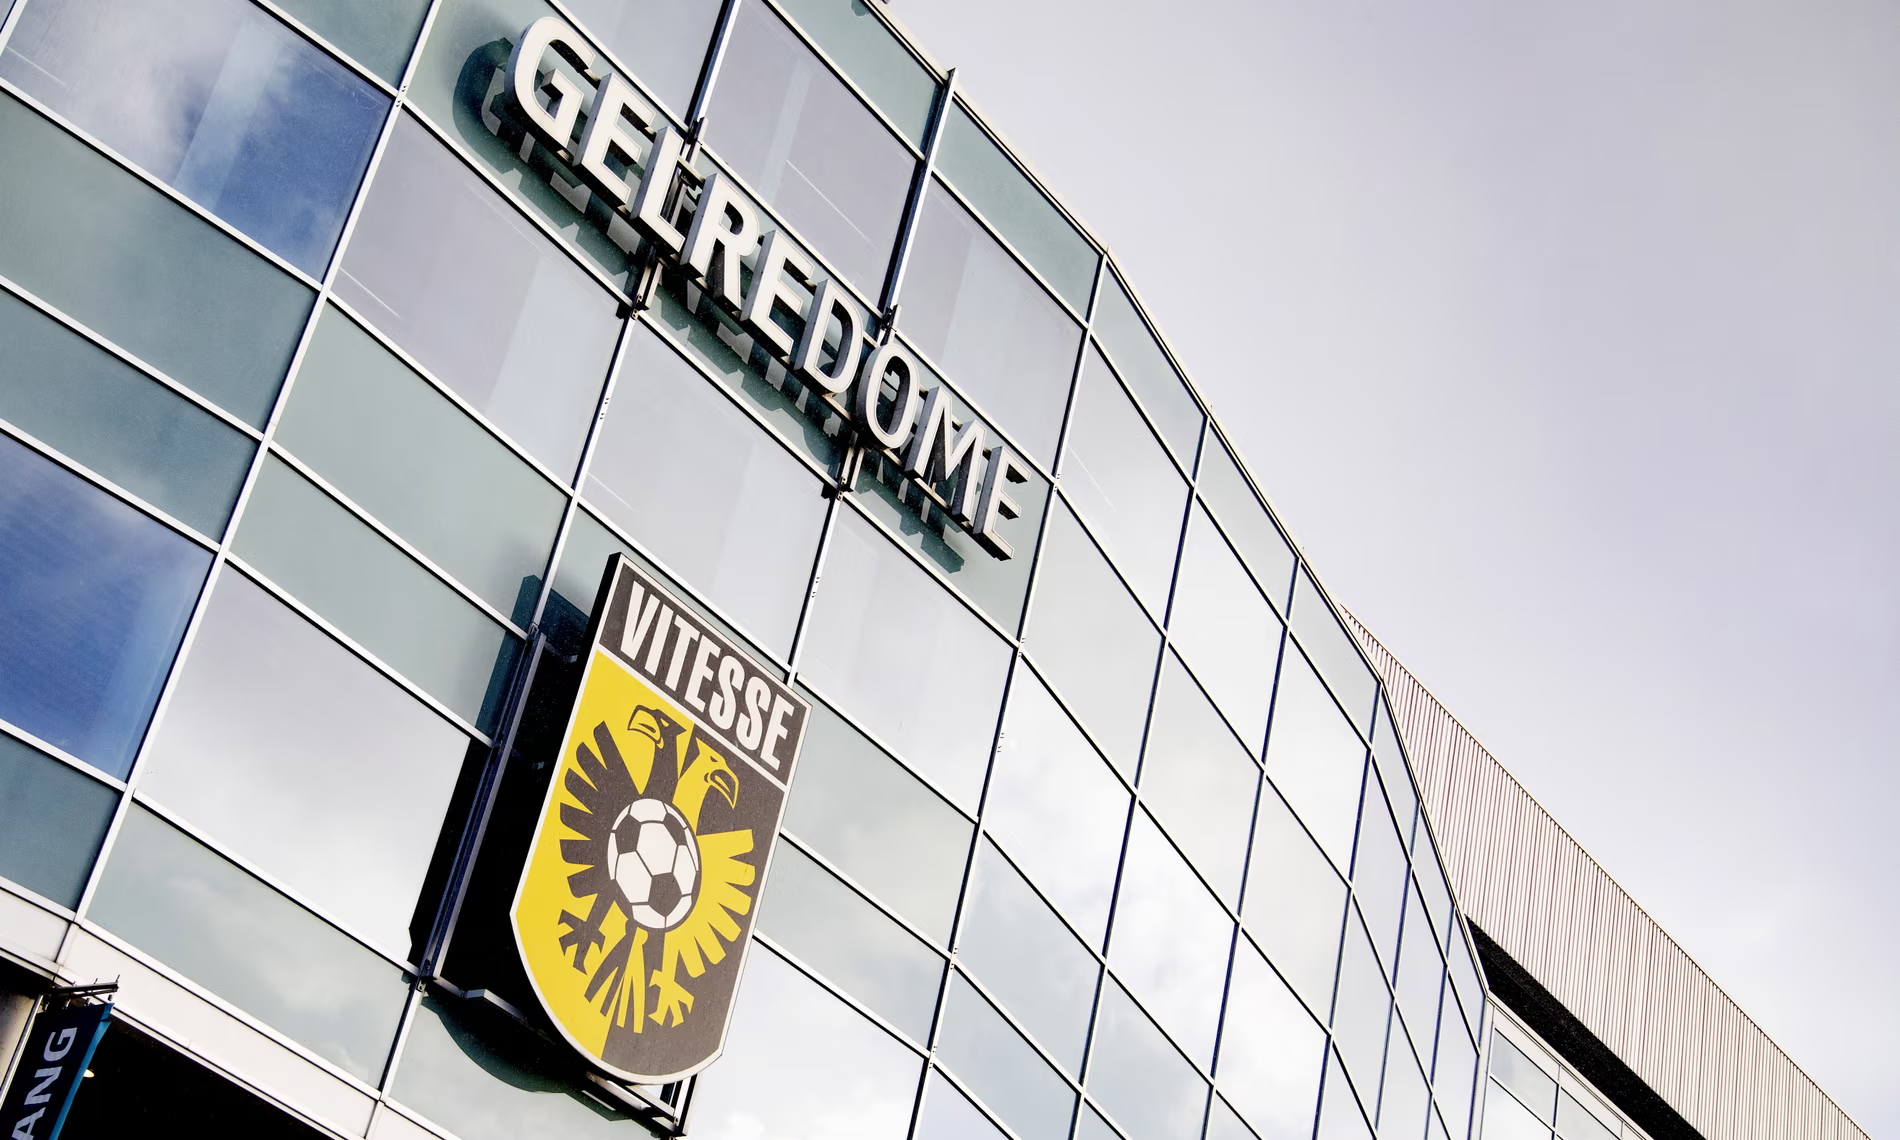 Dutch club Vitesse relegated from Eredivisie after 18-point deduction